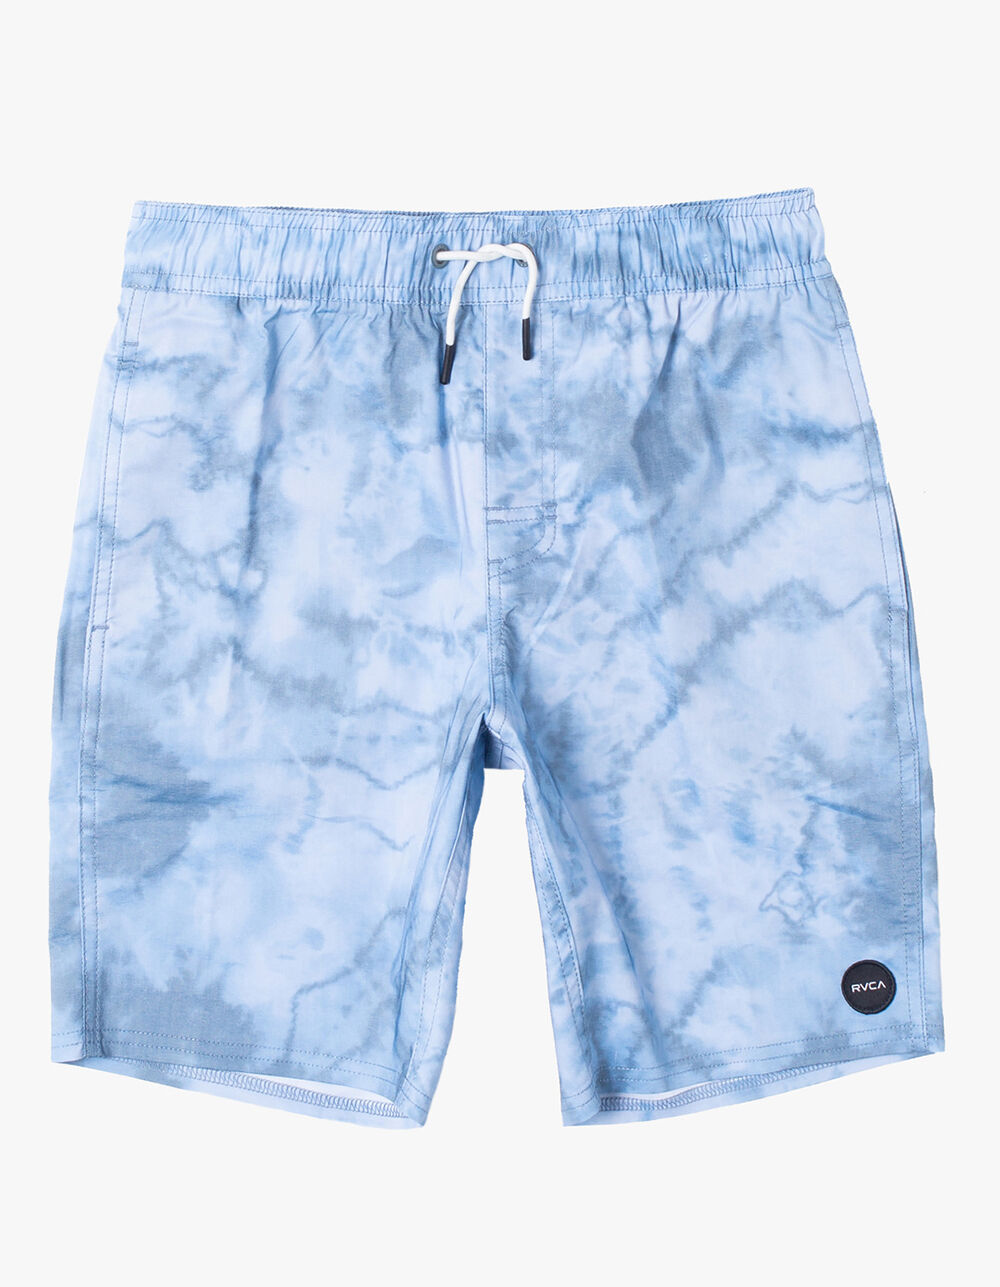 RVCA Arch Boys Volley Shorts - BLUE COMBO | Tillys